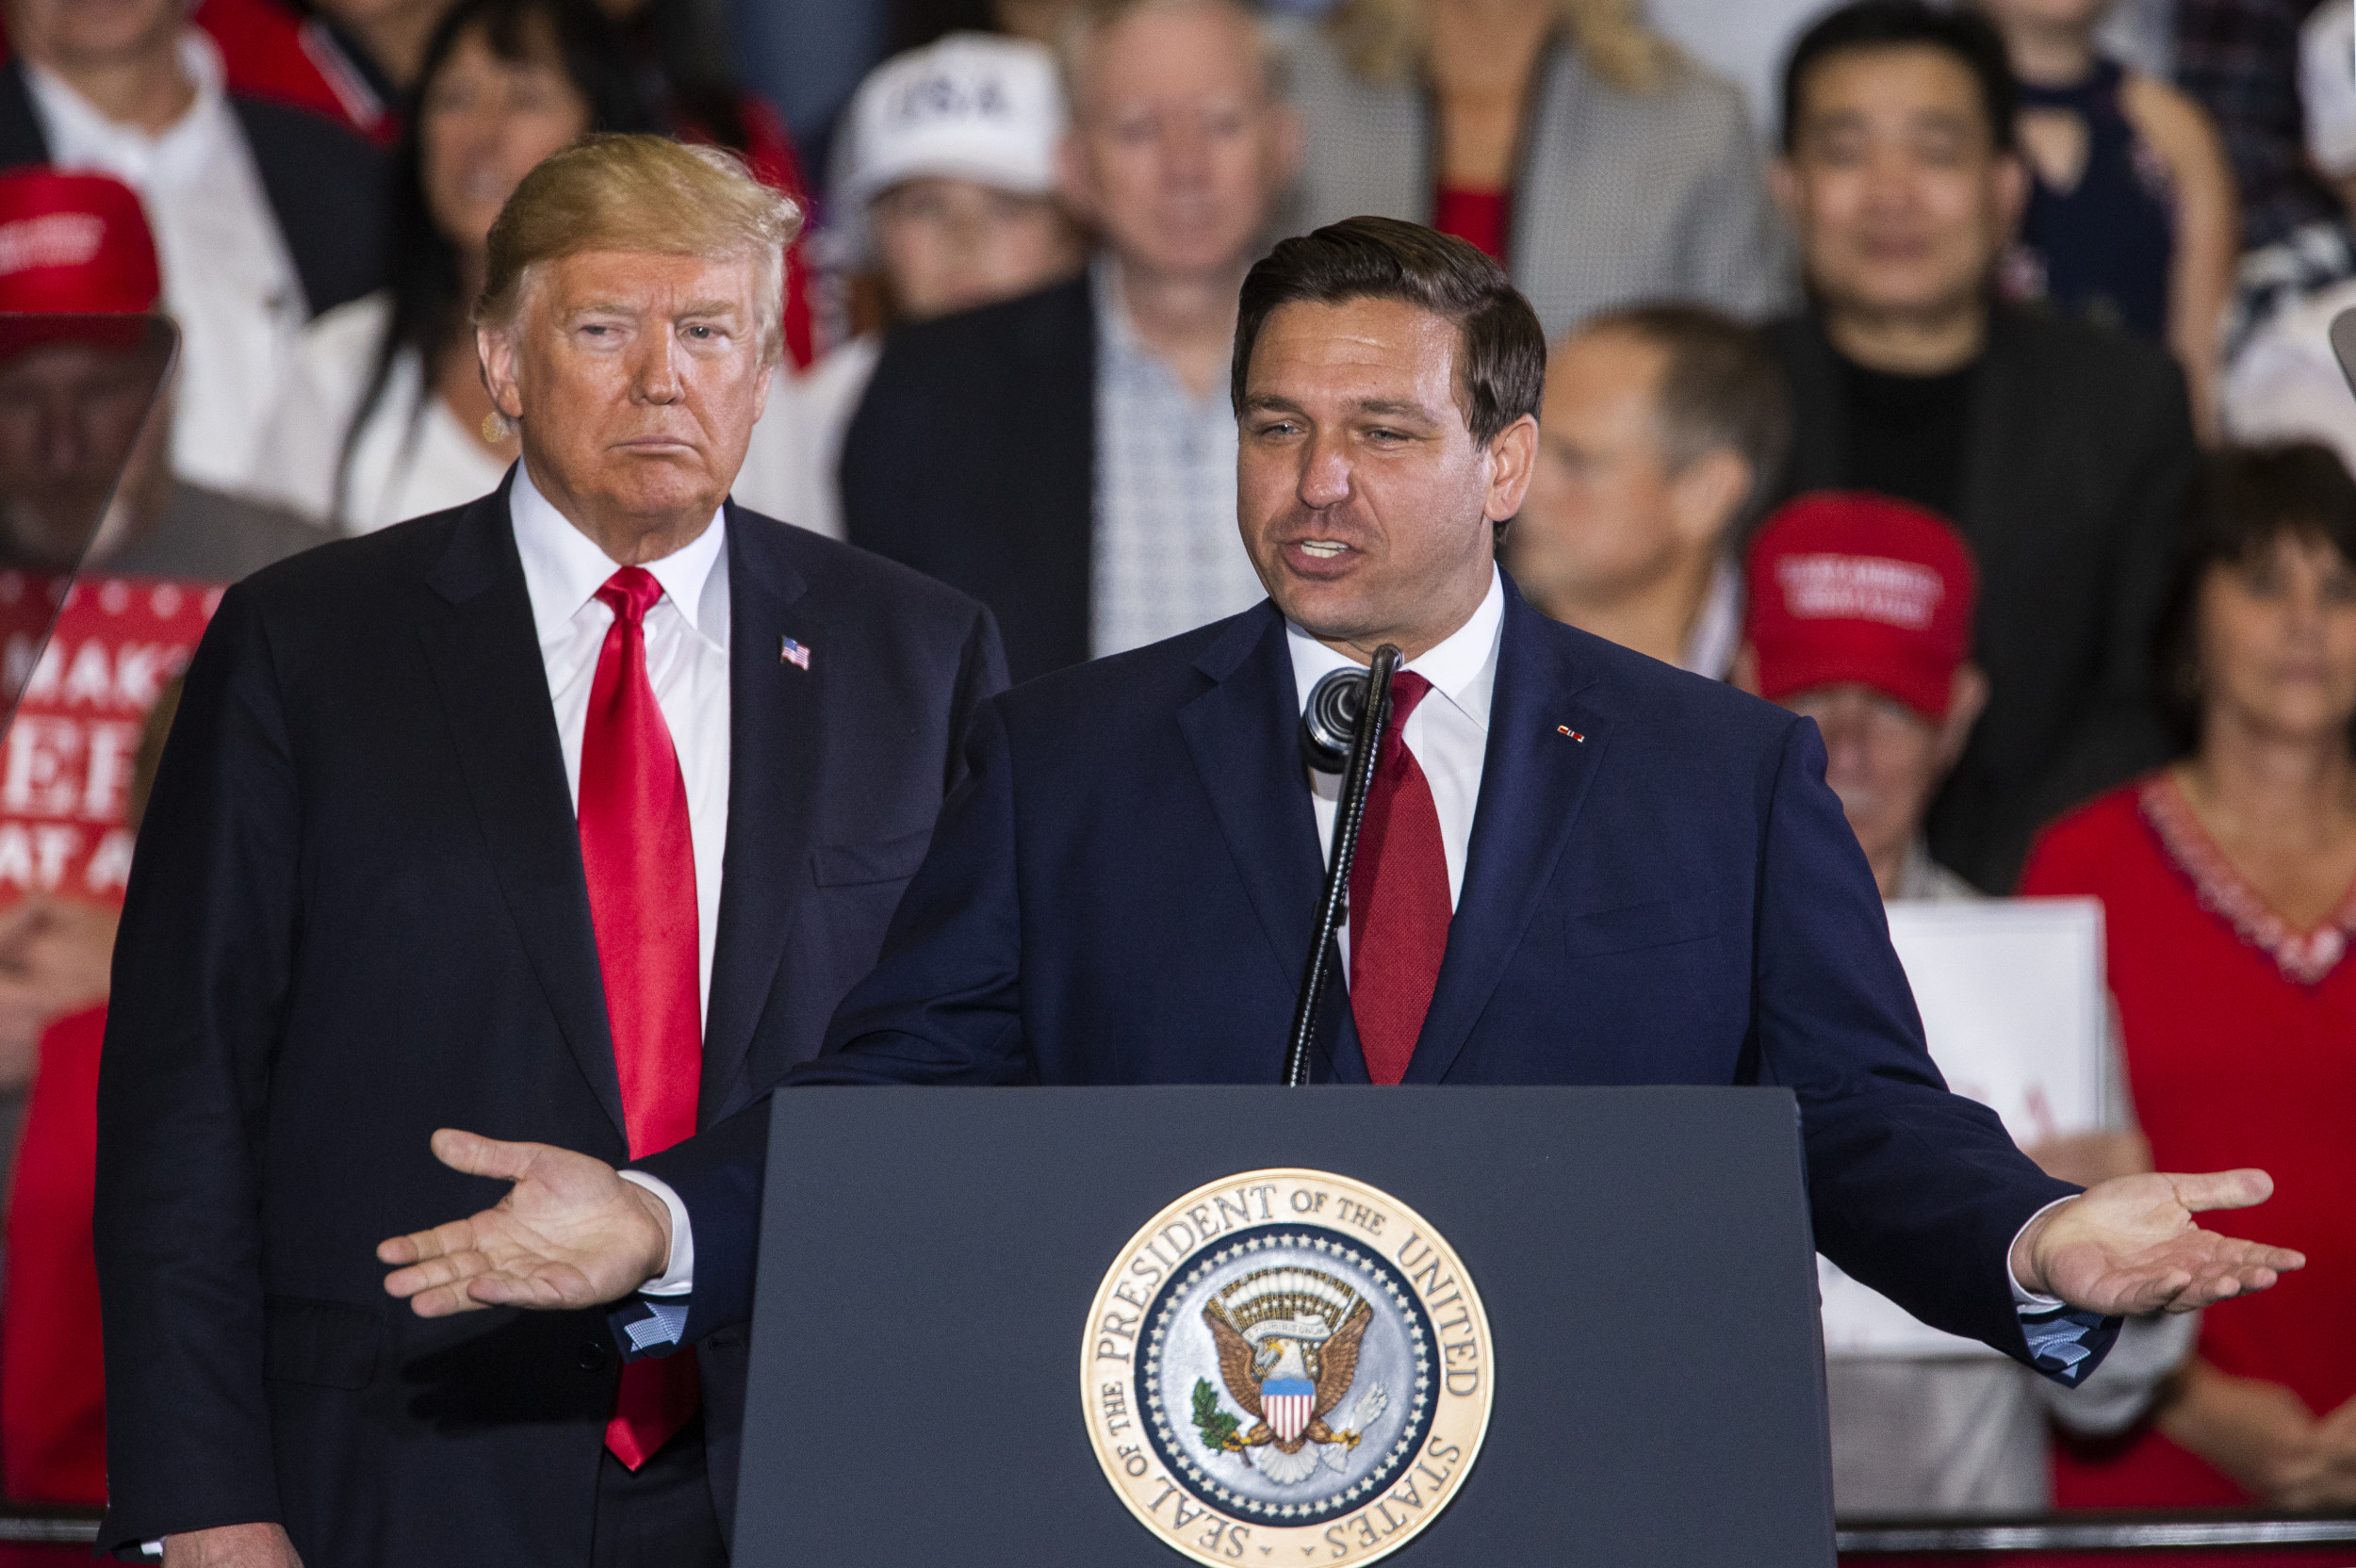 Trump Considering Ron DeSantis for Vice President if He Runs in 2024